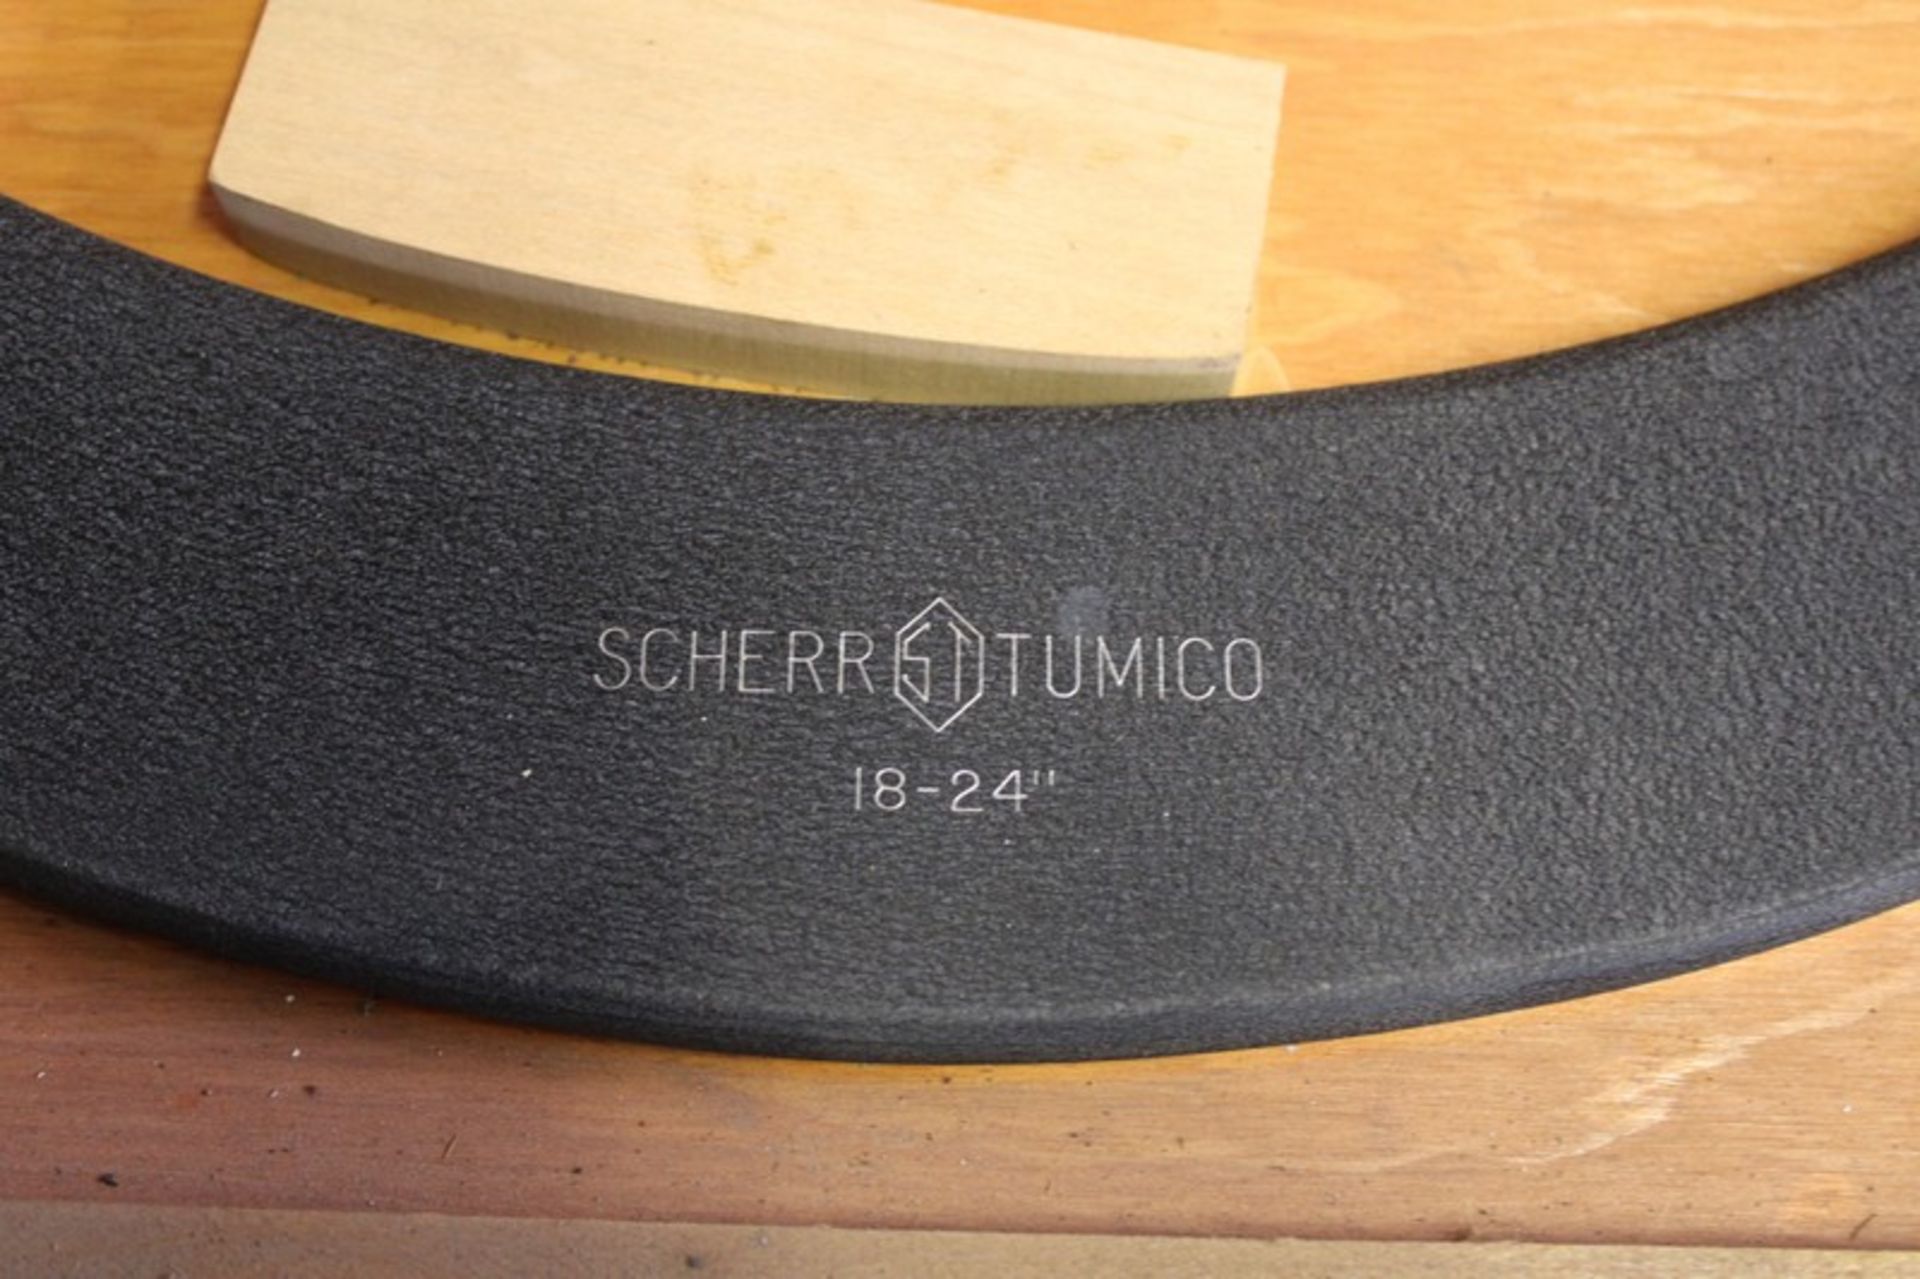 SHERR TUMICO 18-24" MICROMETER WITH STANDARDS - Image 2 of 2